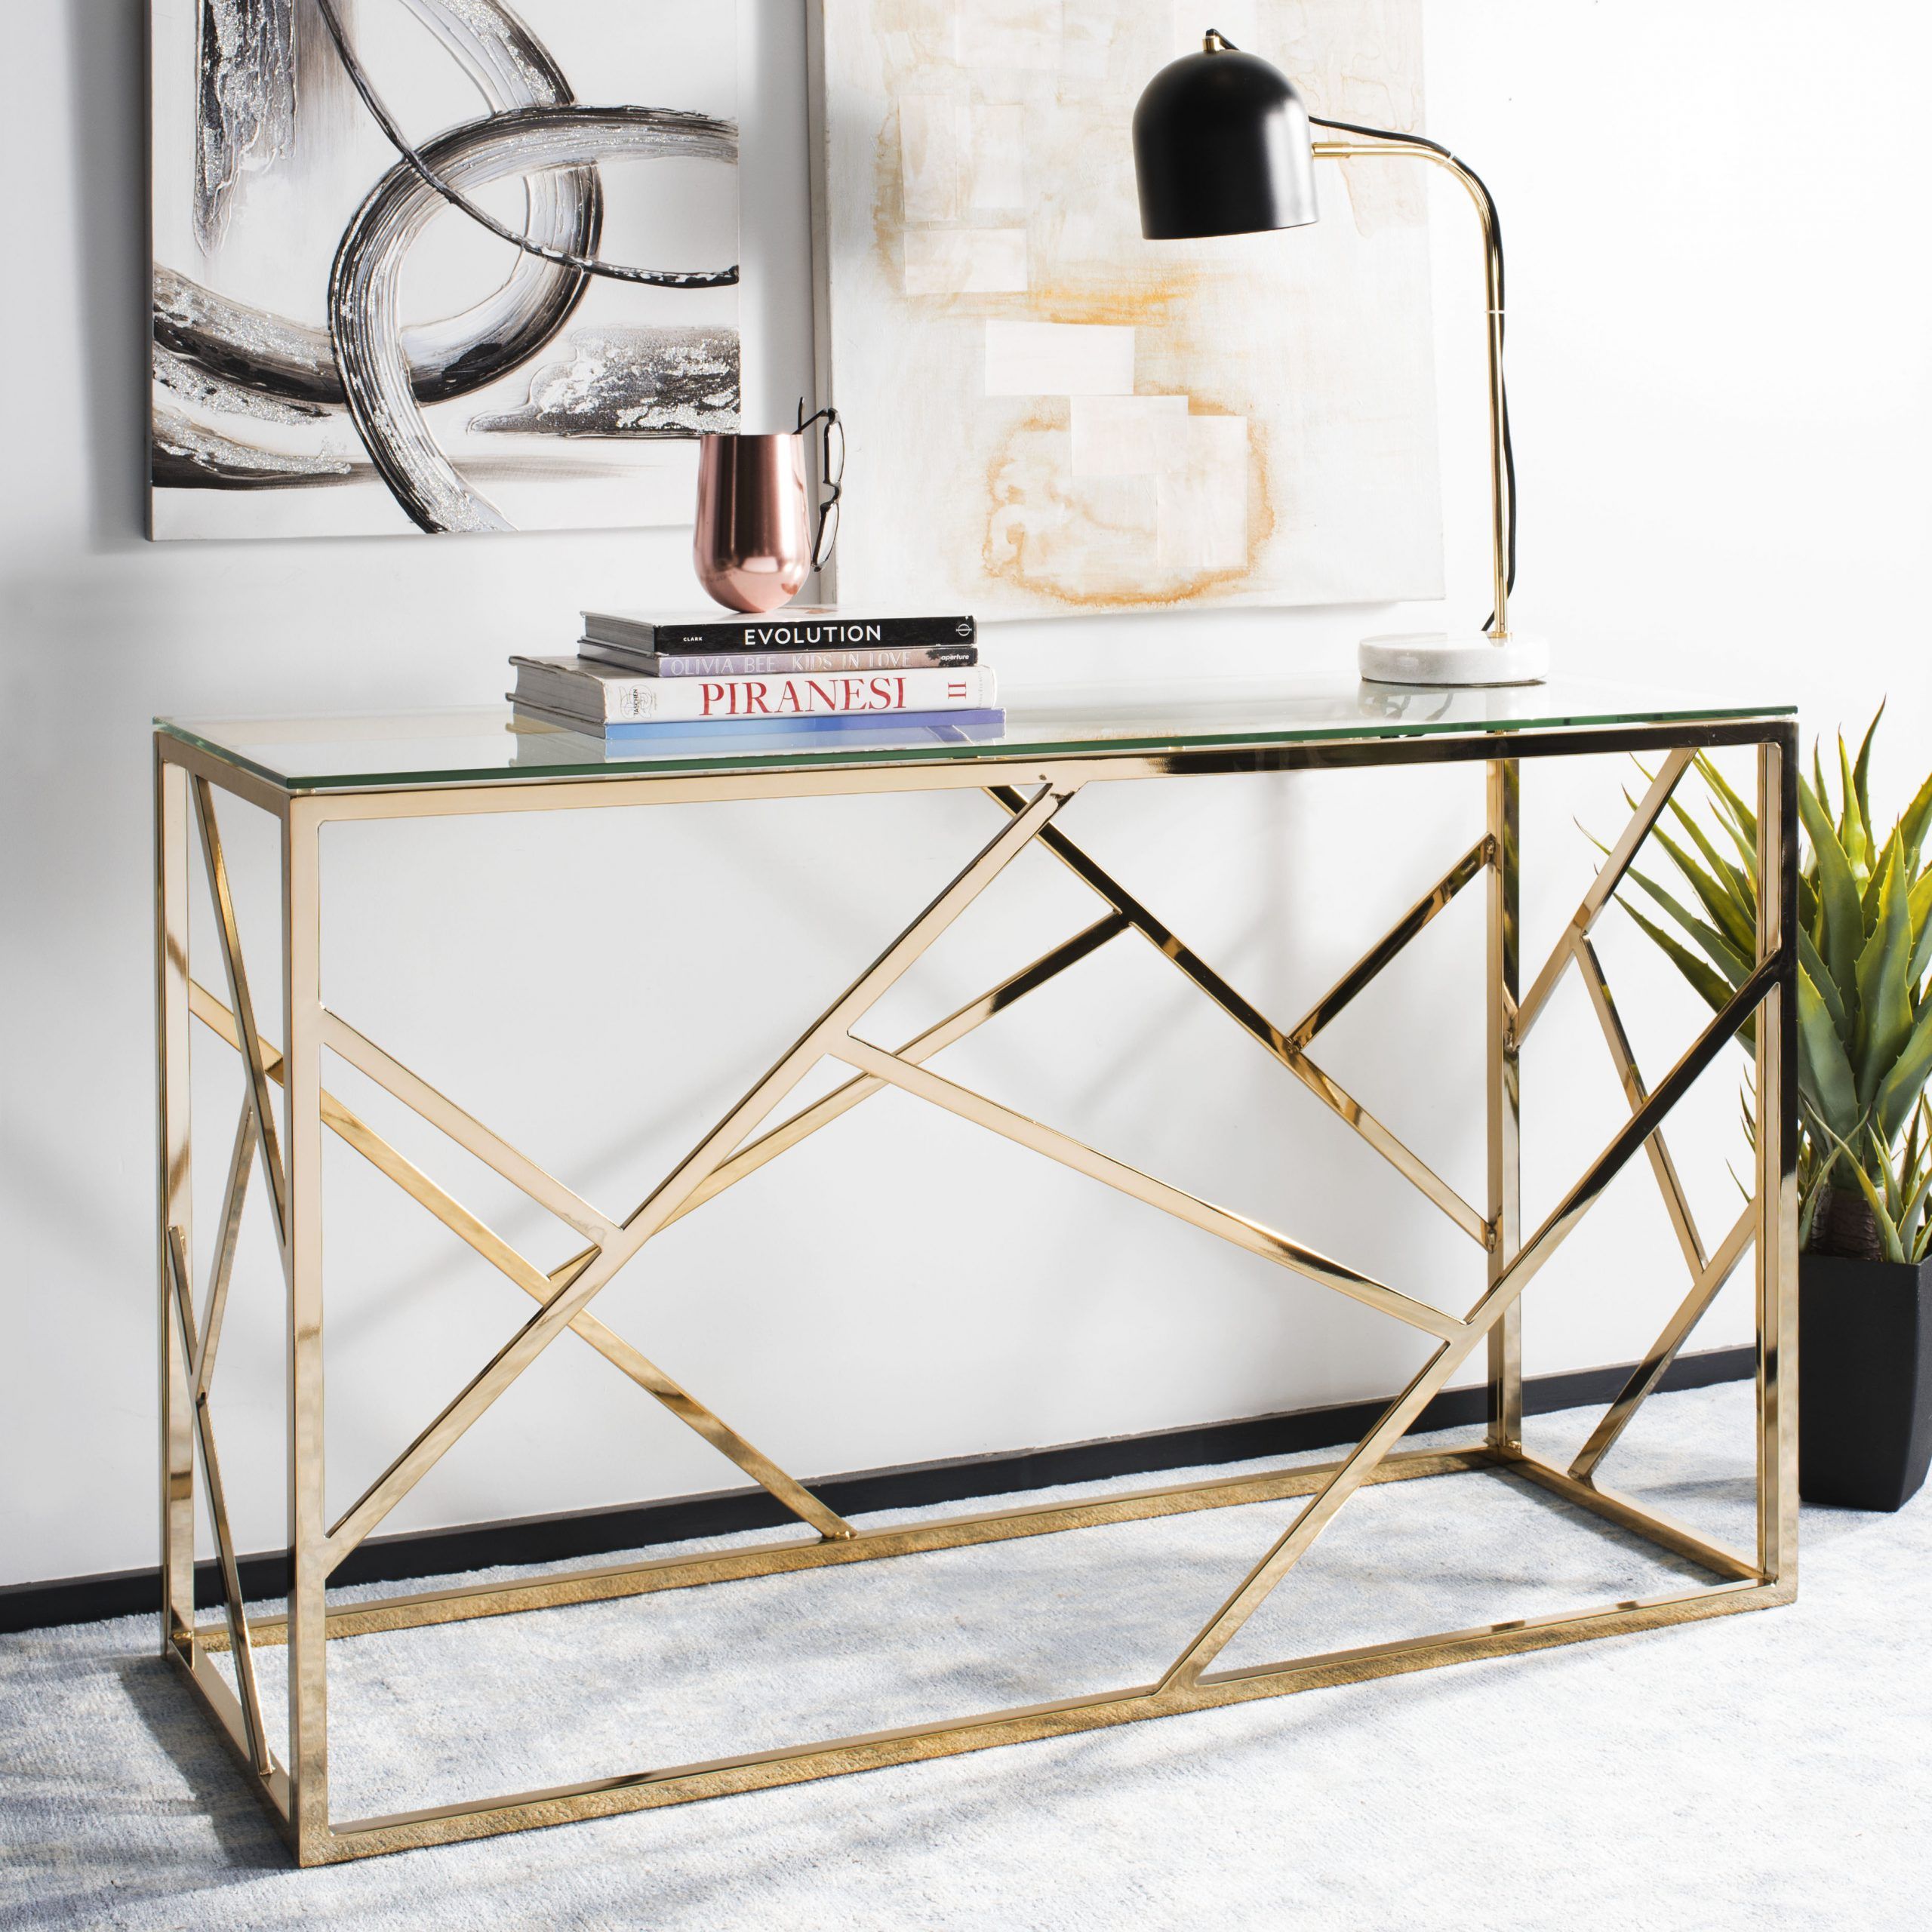 Safavieh Namiko Modern Glam Console Table, Brass/glass Top Inside Glass Console Tables (View 7 of 20)